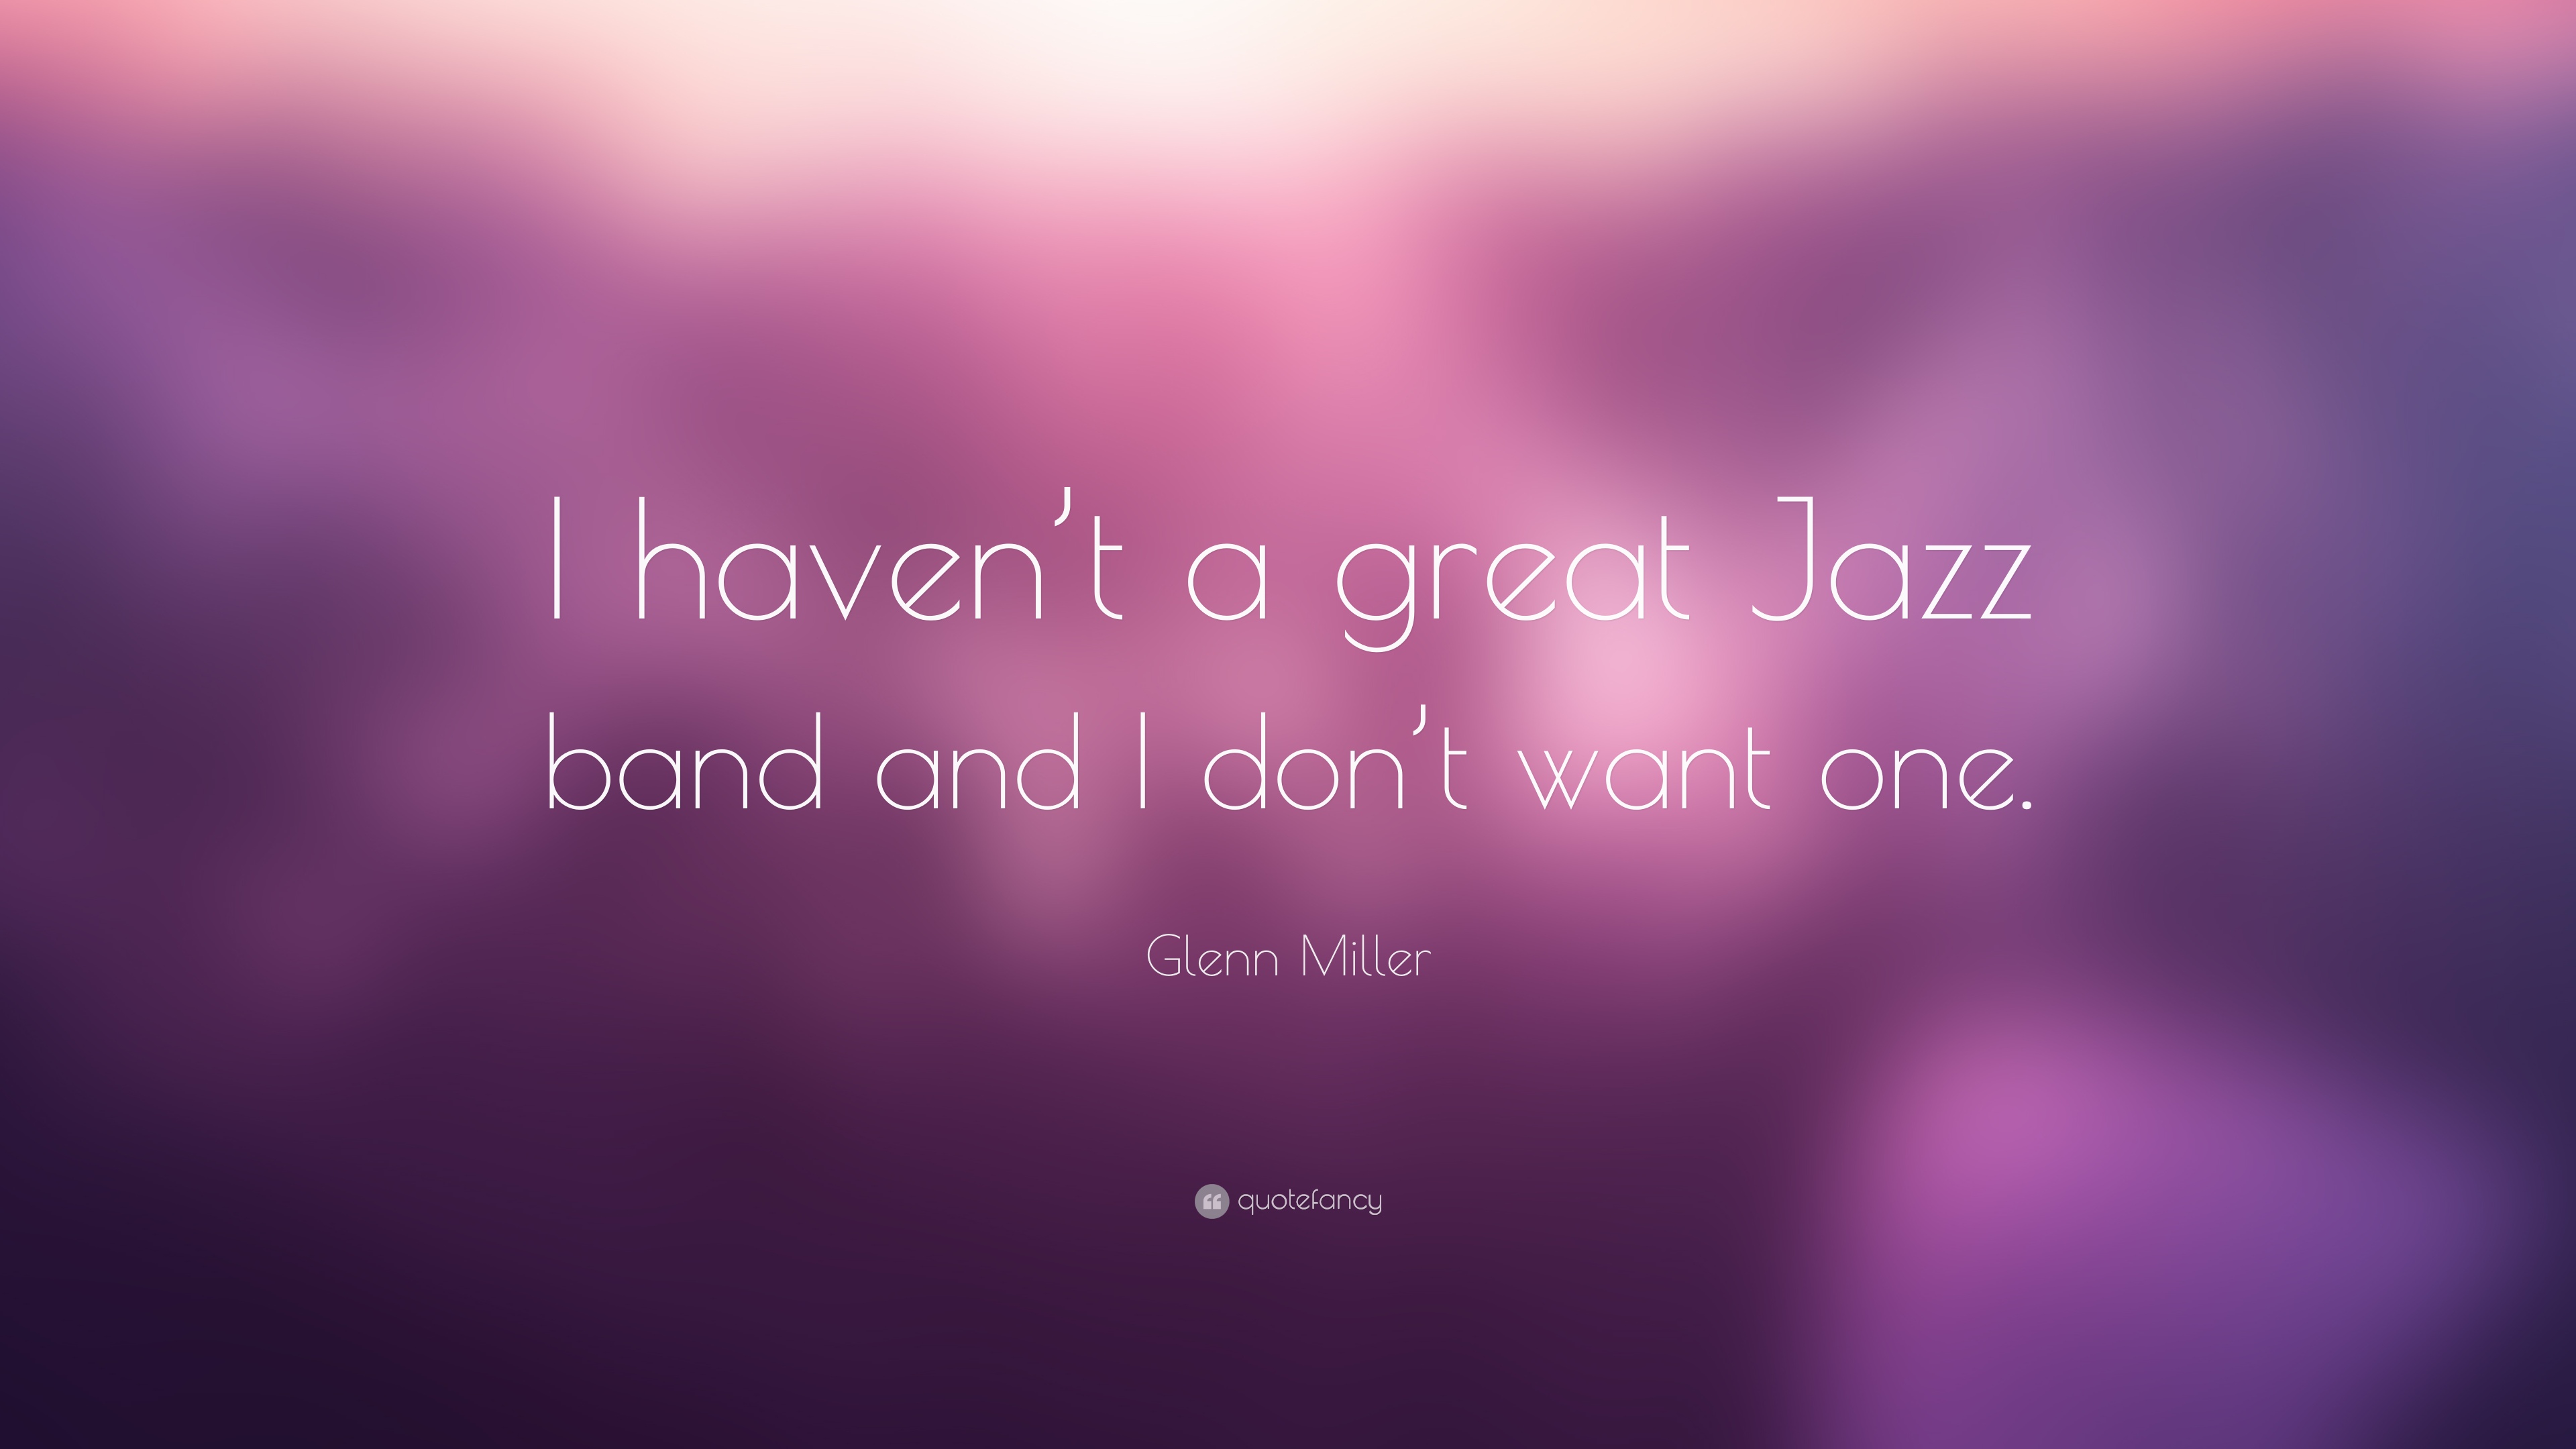 8 Quotes About Glenn Miller